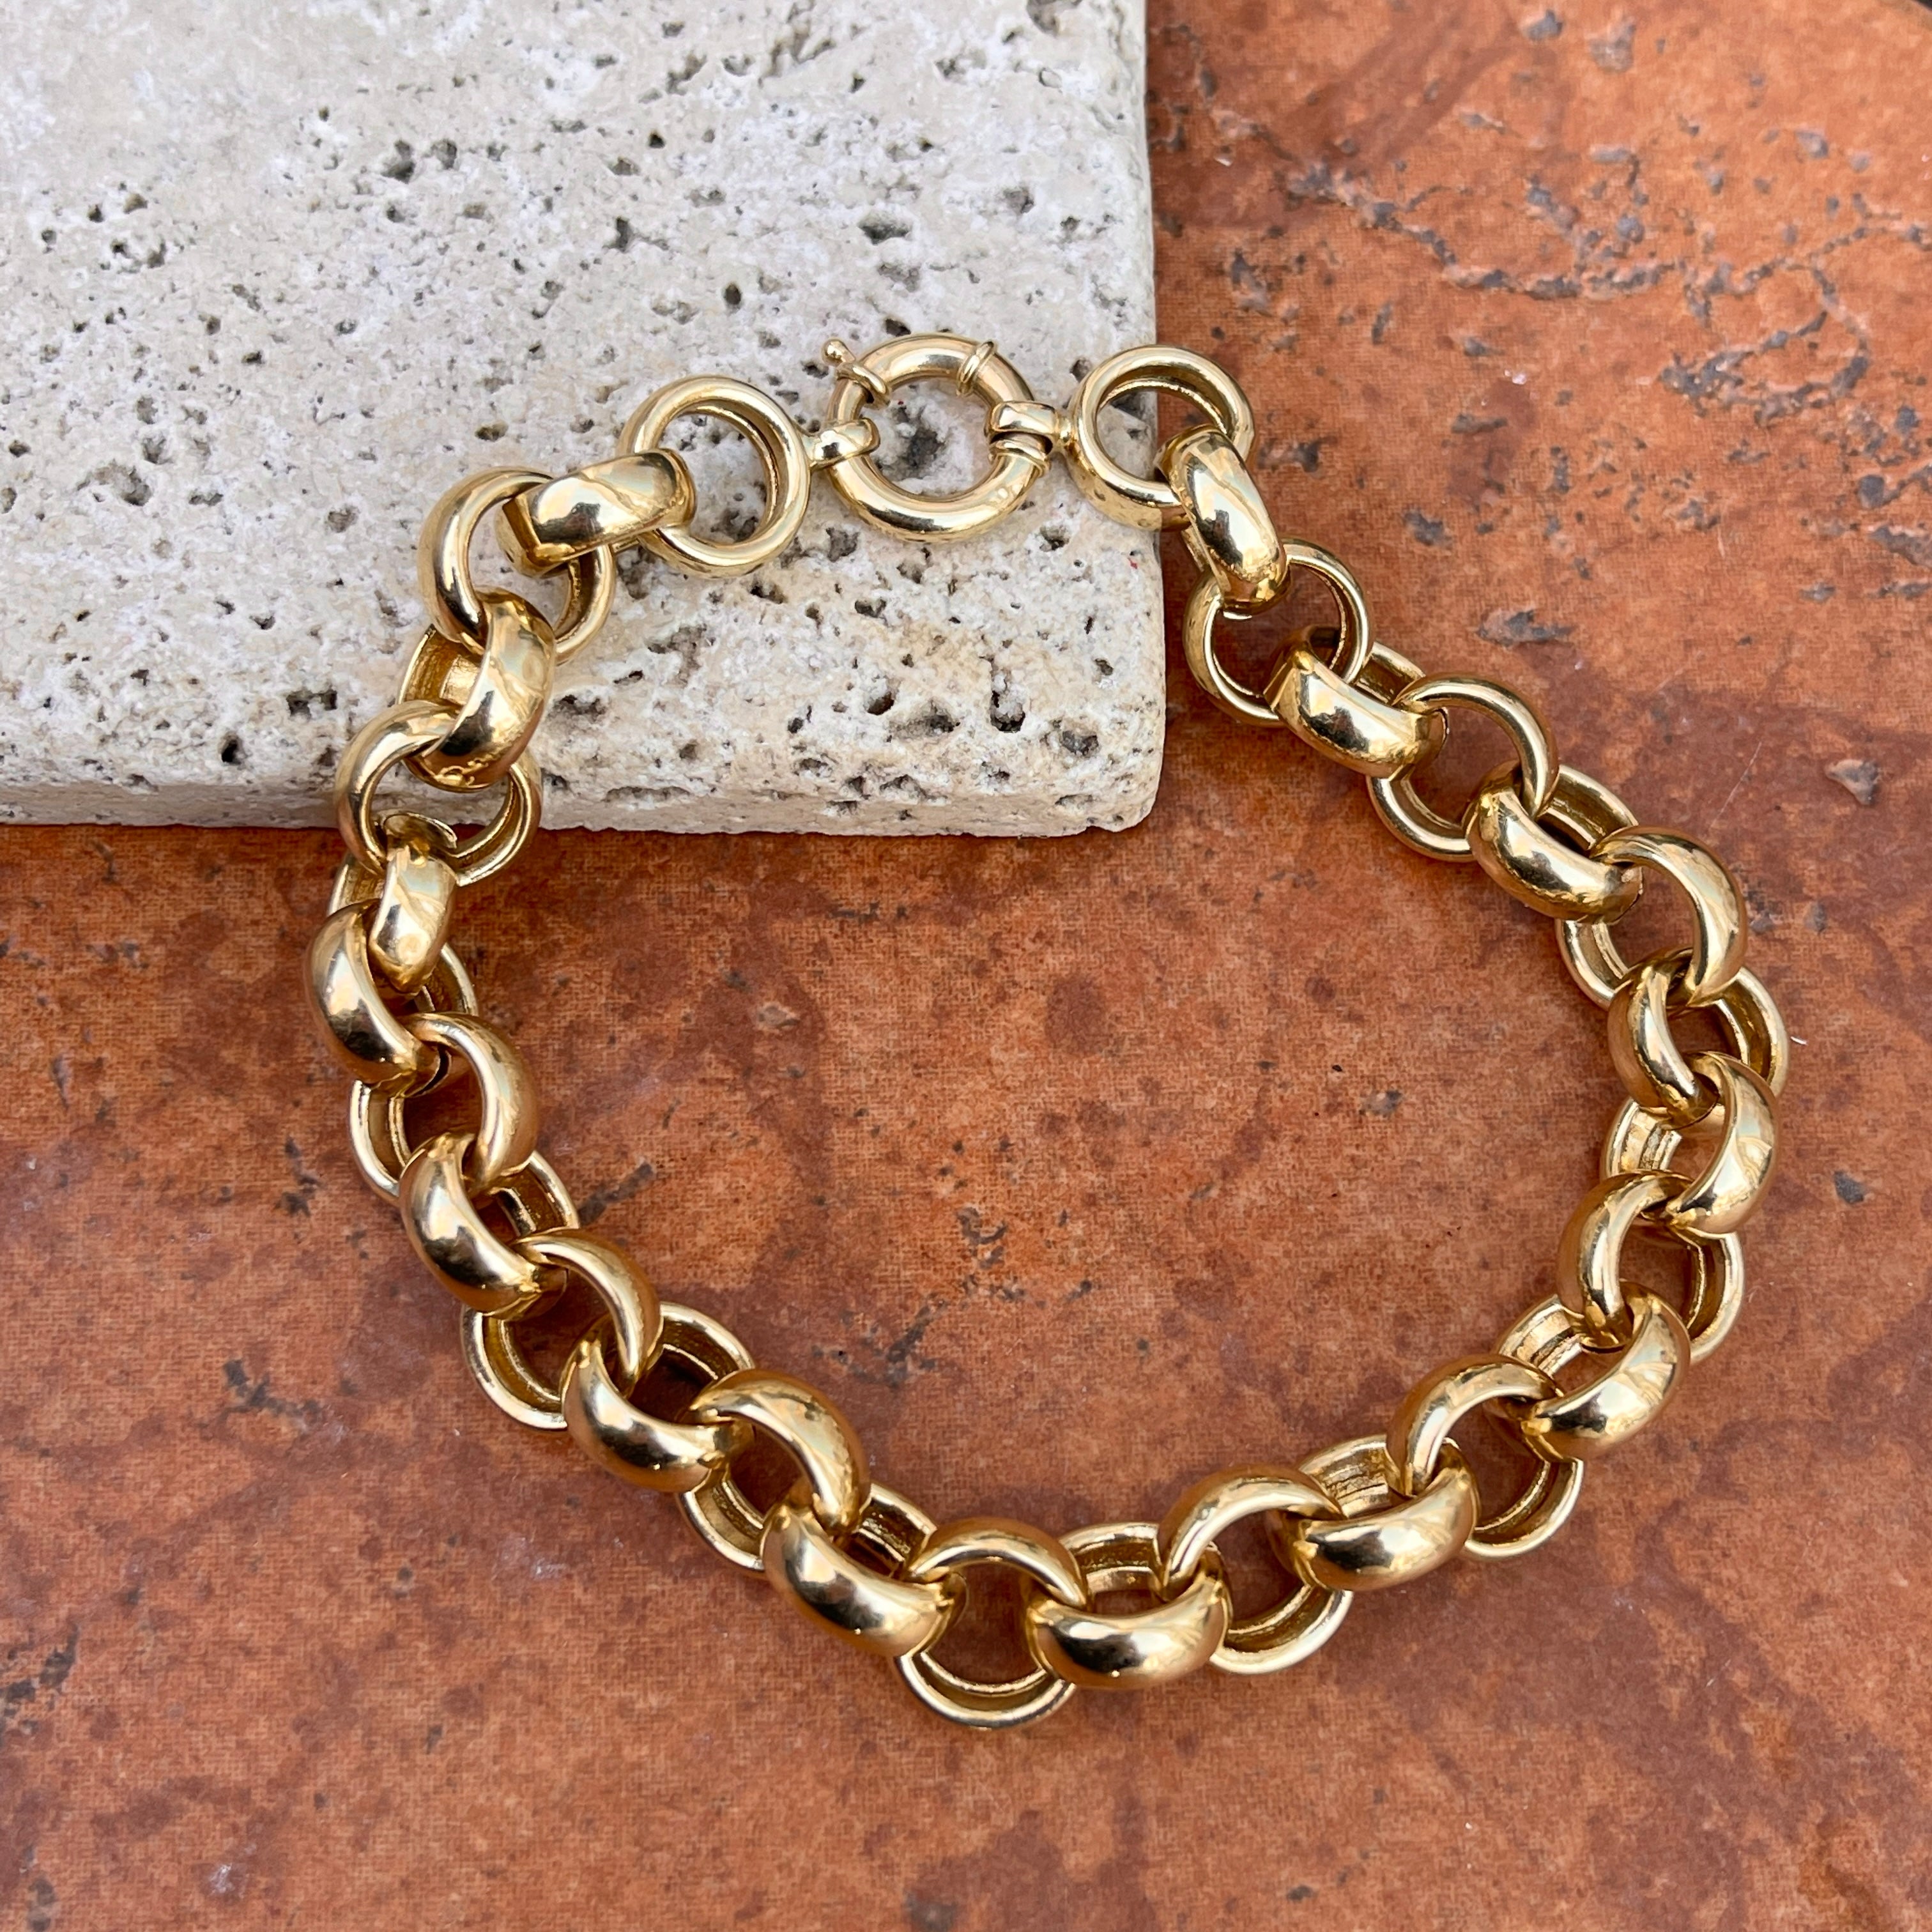 Wanderlust+Co Out Of This World Gold Toggle Bracelet - 14K Real Gold Plated  Jewelry, Women's Fashion, Jewelry & Organisers, Bracelets on Carousell